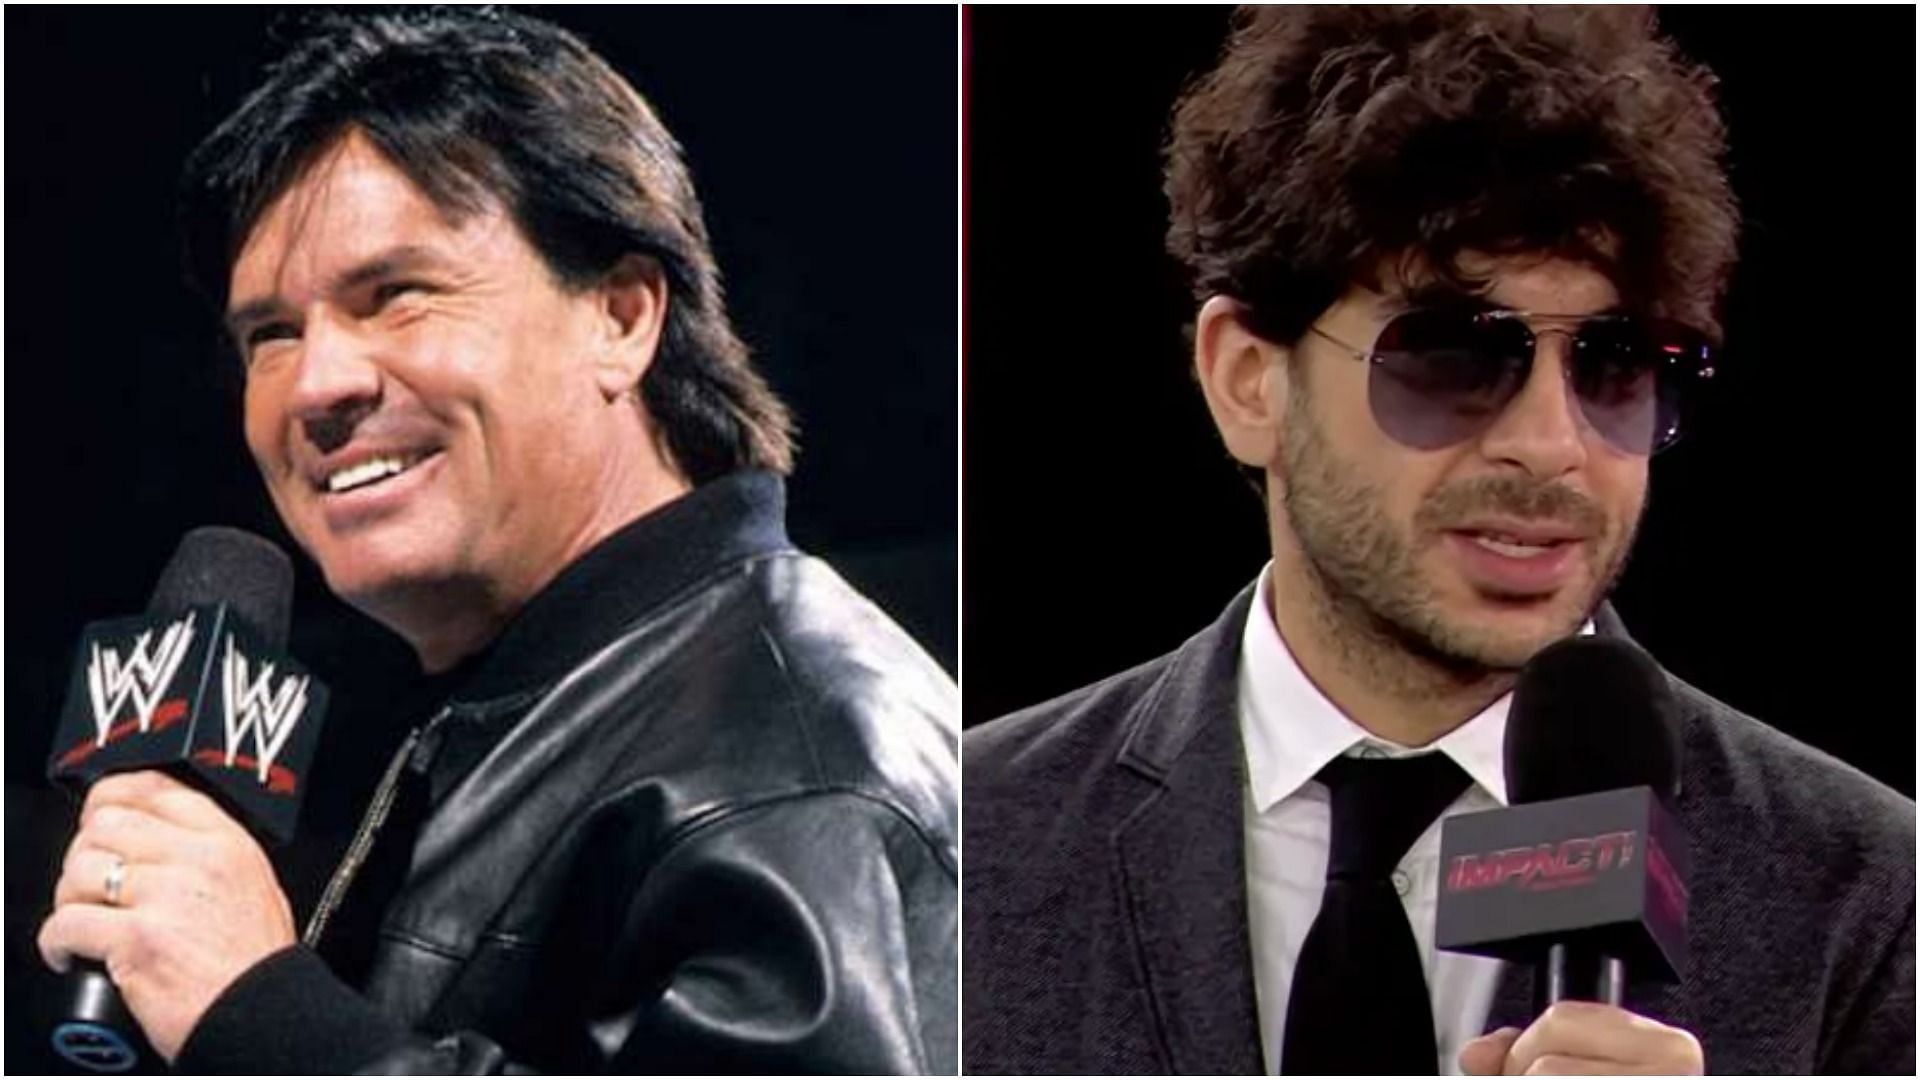 Eric Bischoff in WWE and Tony Khan in IMPACT Wrestling